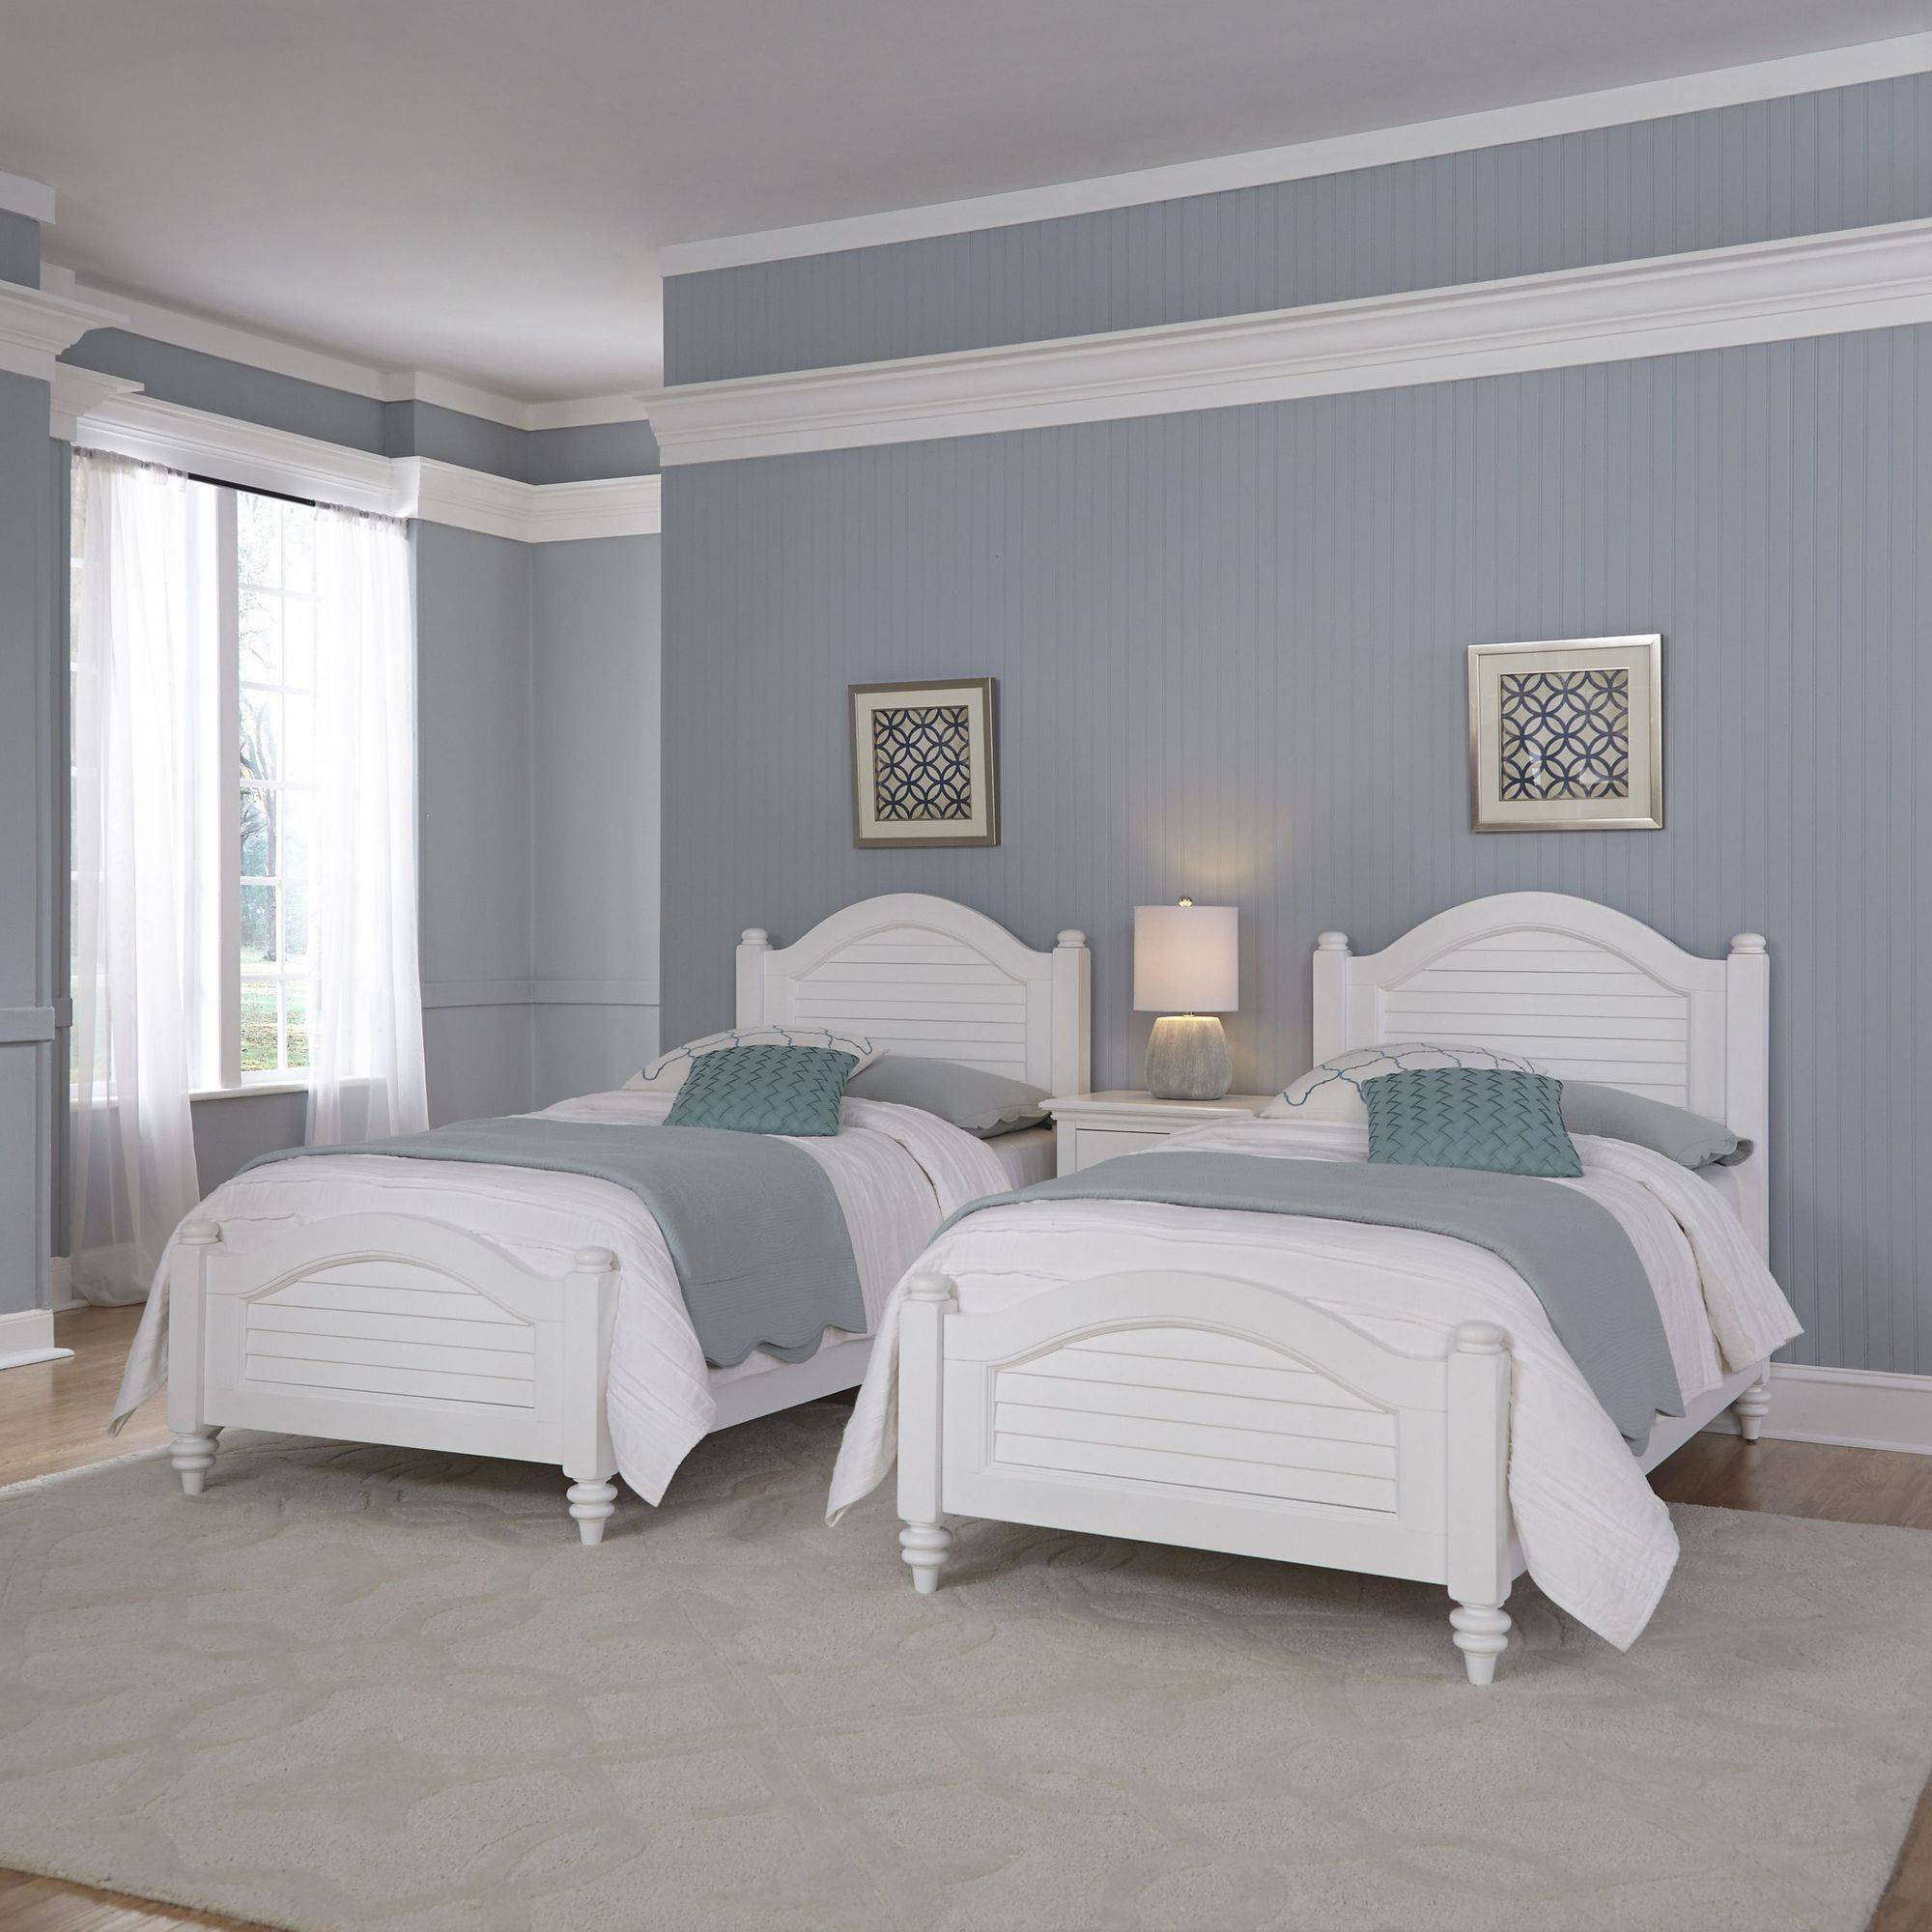 Home Styles Furniture Bermuda White 2 Twin Beds And Night Stand throughout sizing 2000 X 2000